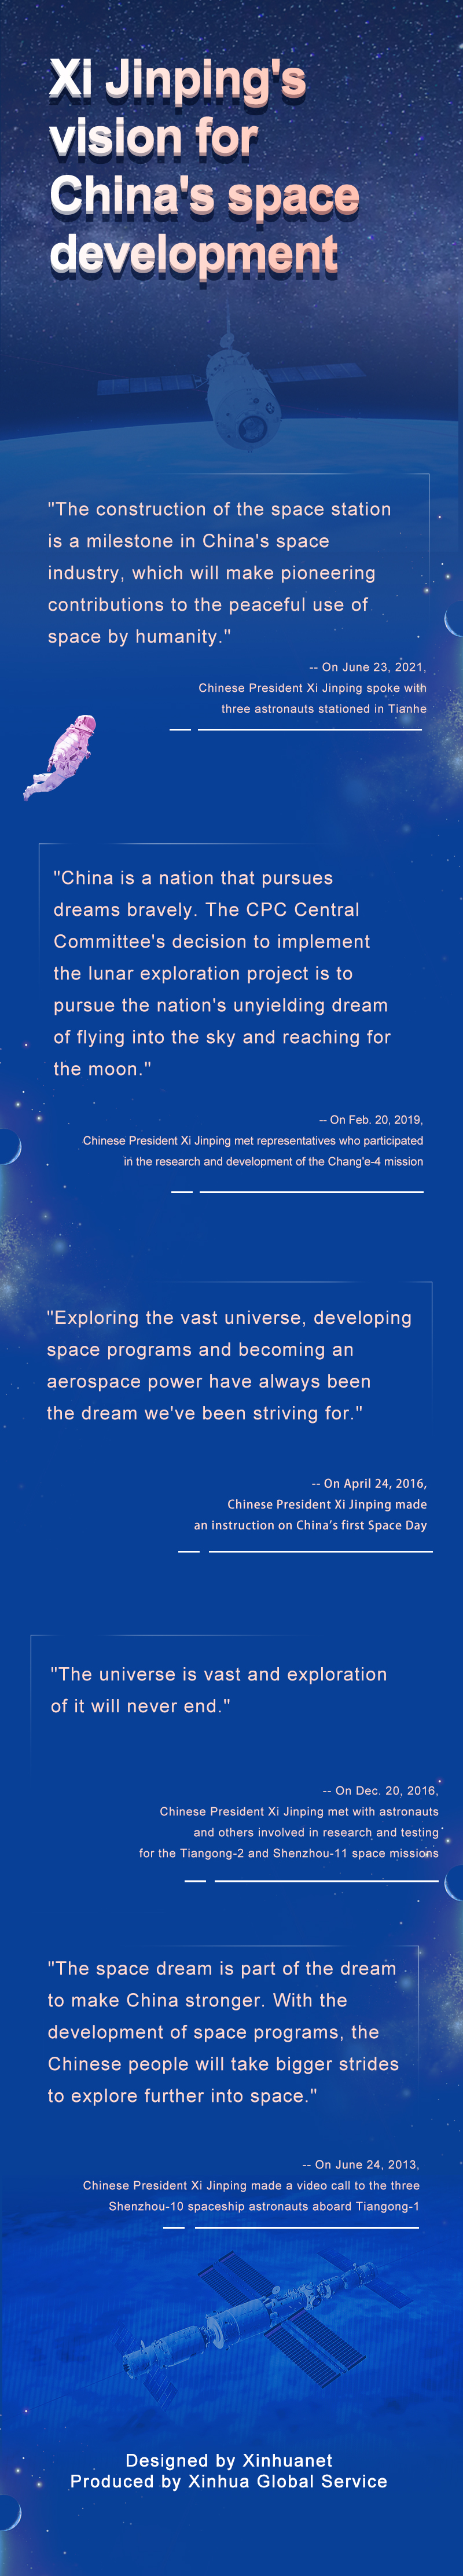 (Poster) Xi Jinping's Vision for China's Space Development